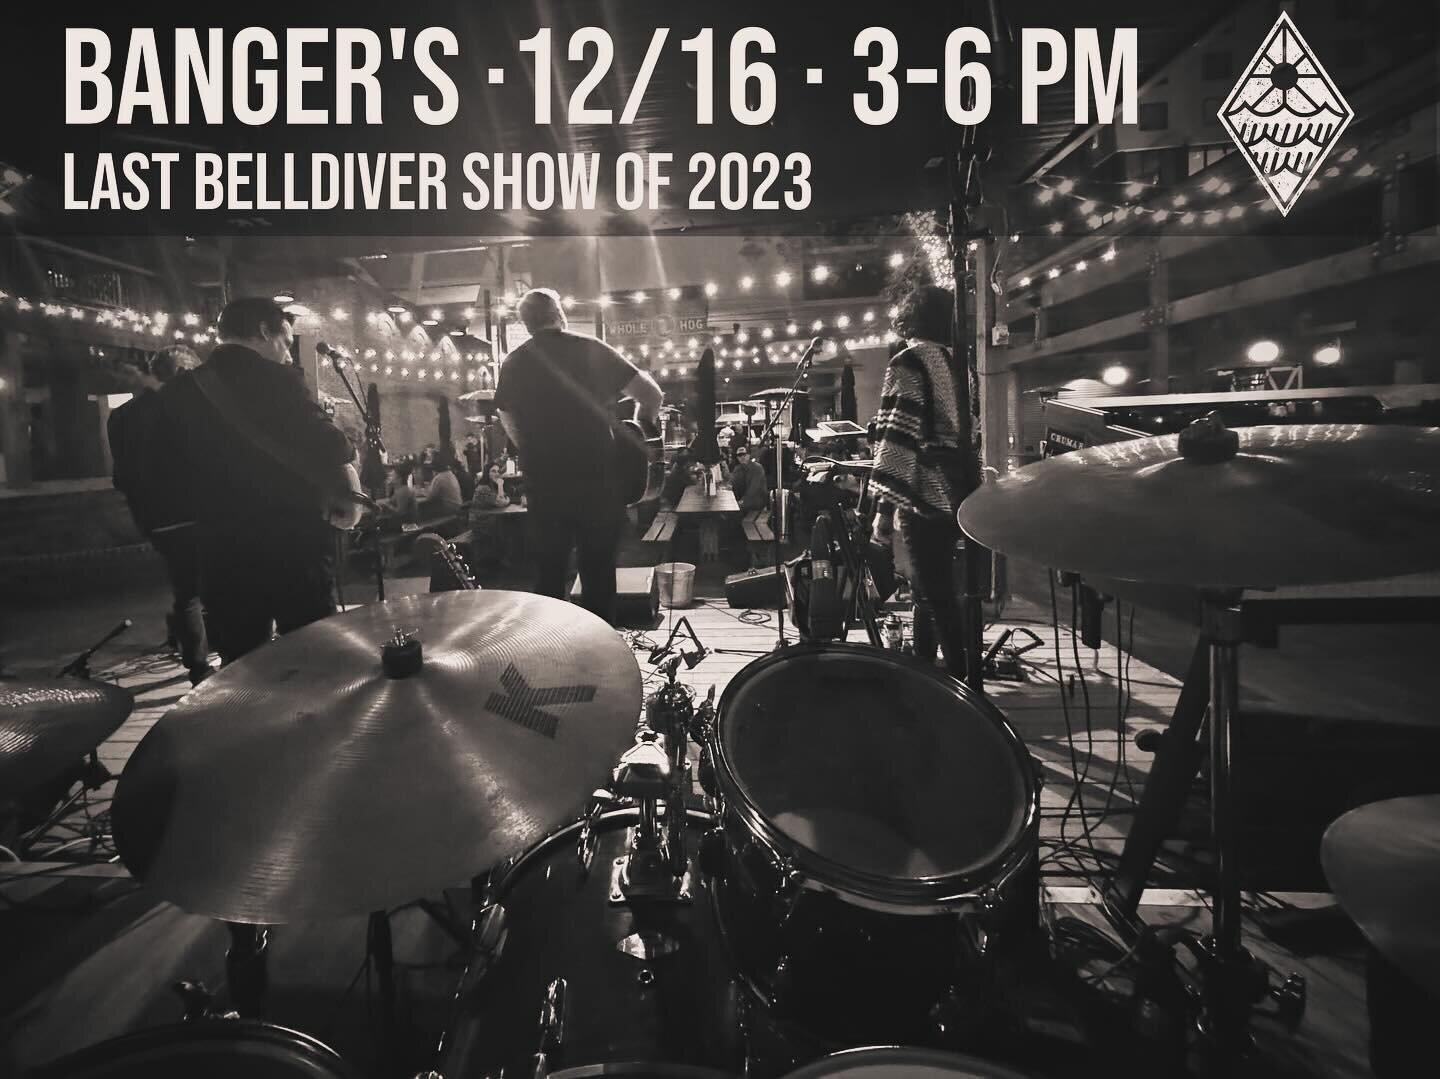 Wrapping up the year at one of our favorite places to play. Please join us at @bangersaustin on Saturday from 3-6. Rumor has it there might be some new merch for that Belldiver fan in your life. 👕 

We truly appreciate all of you who made time to co